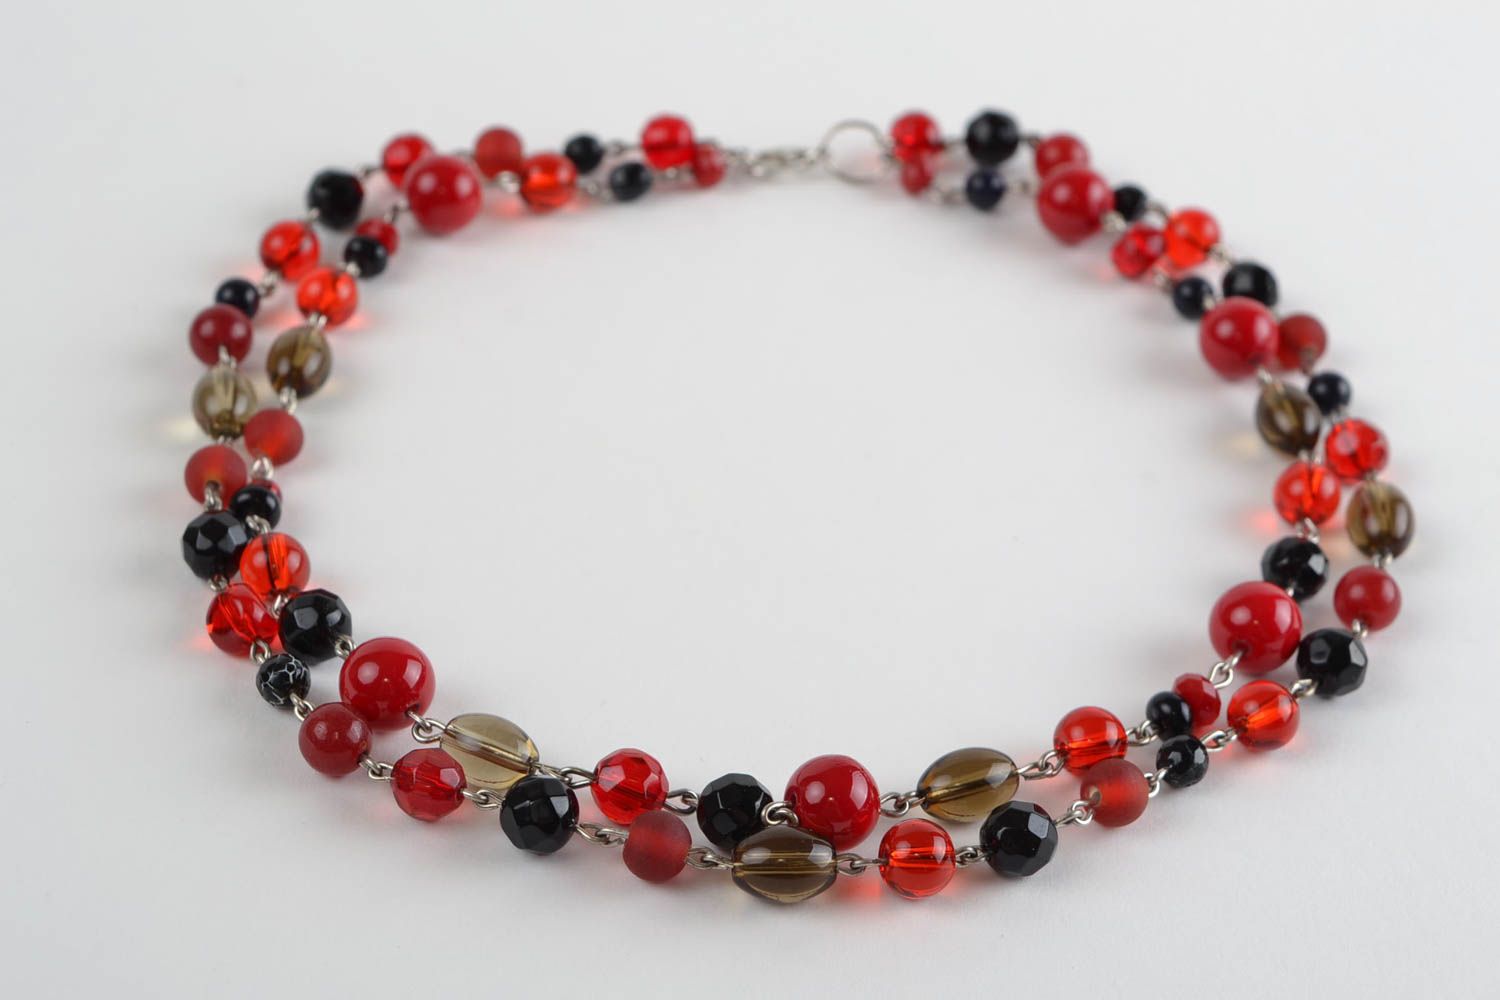 Handmade long women's necklace with natural stone and glass beads red and black photo 5